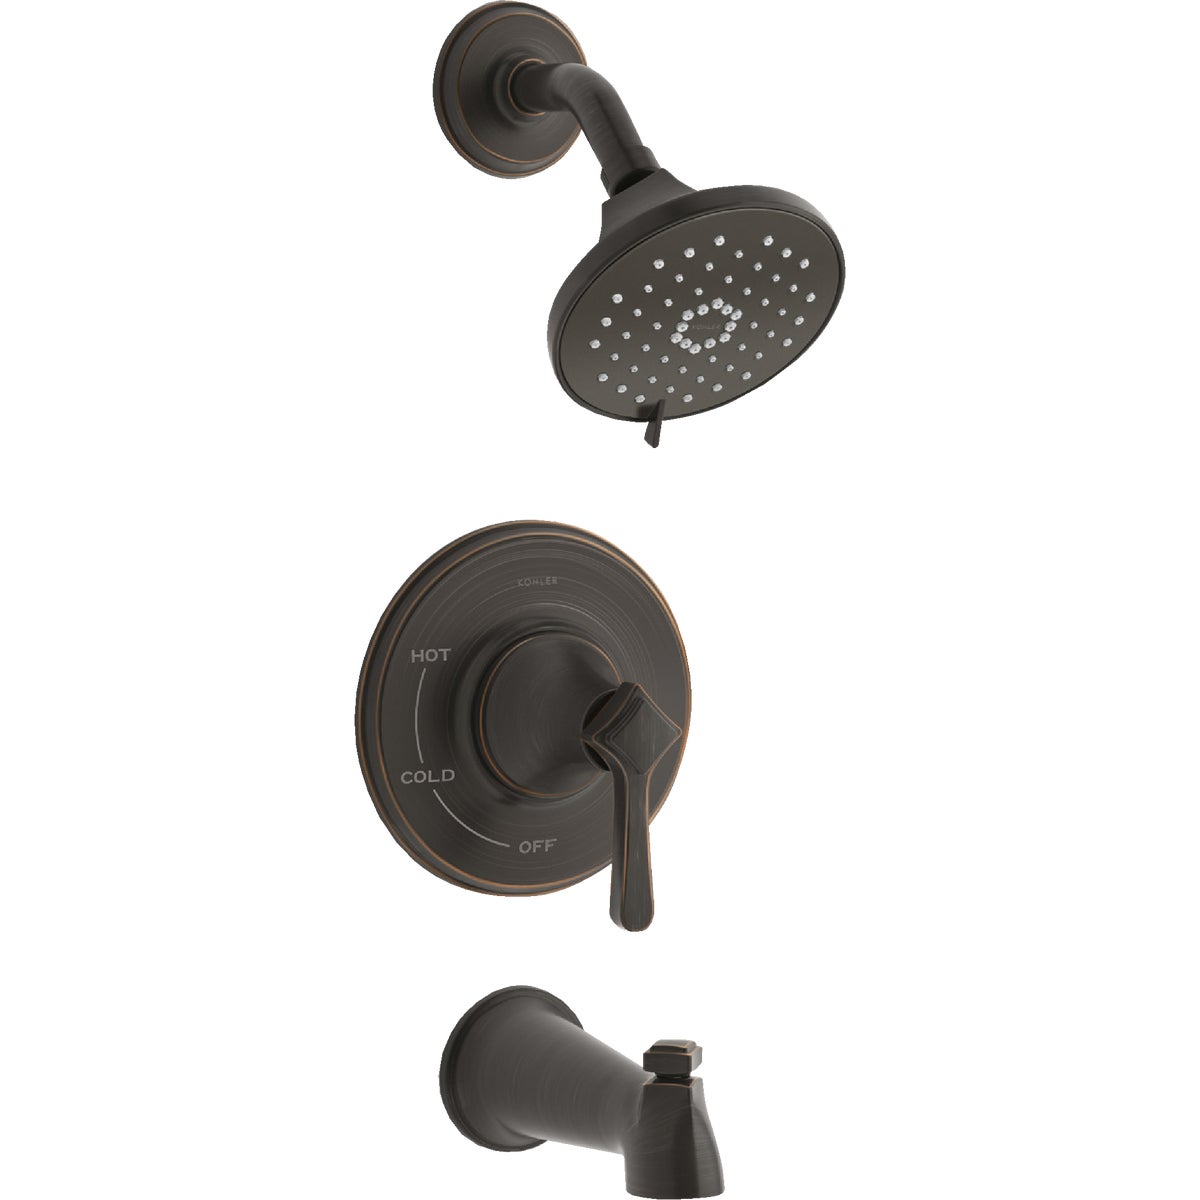 Kohler Georgeson Oil-Rubbed Bronze Single-Handle Water-Saving Tub & Shower Faucet